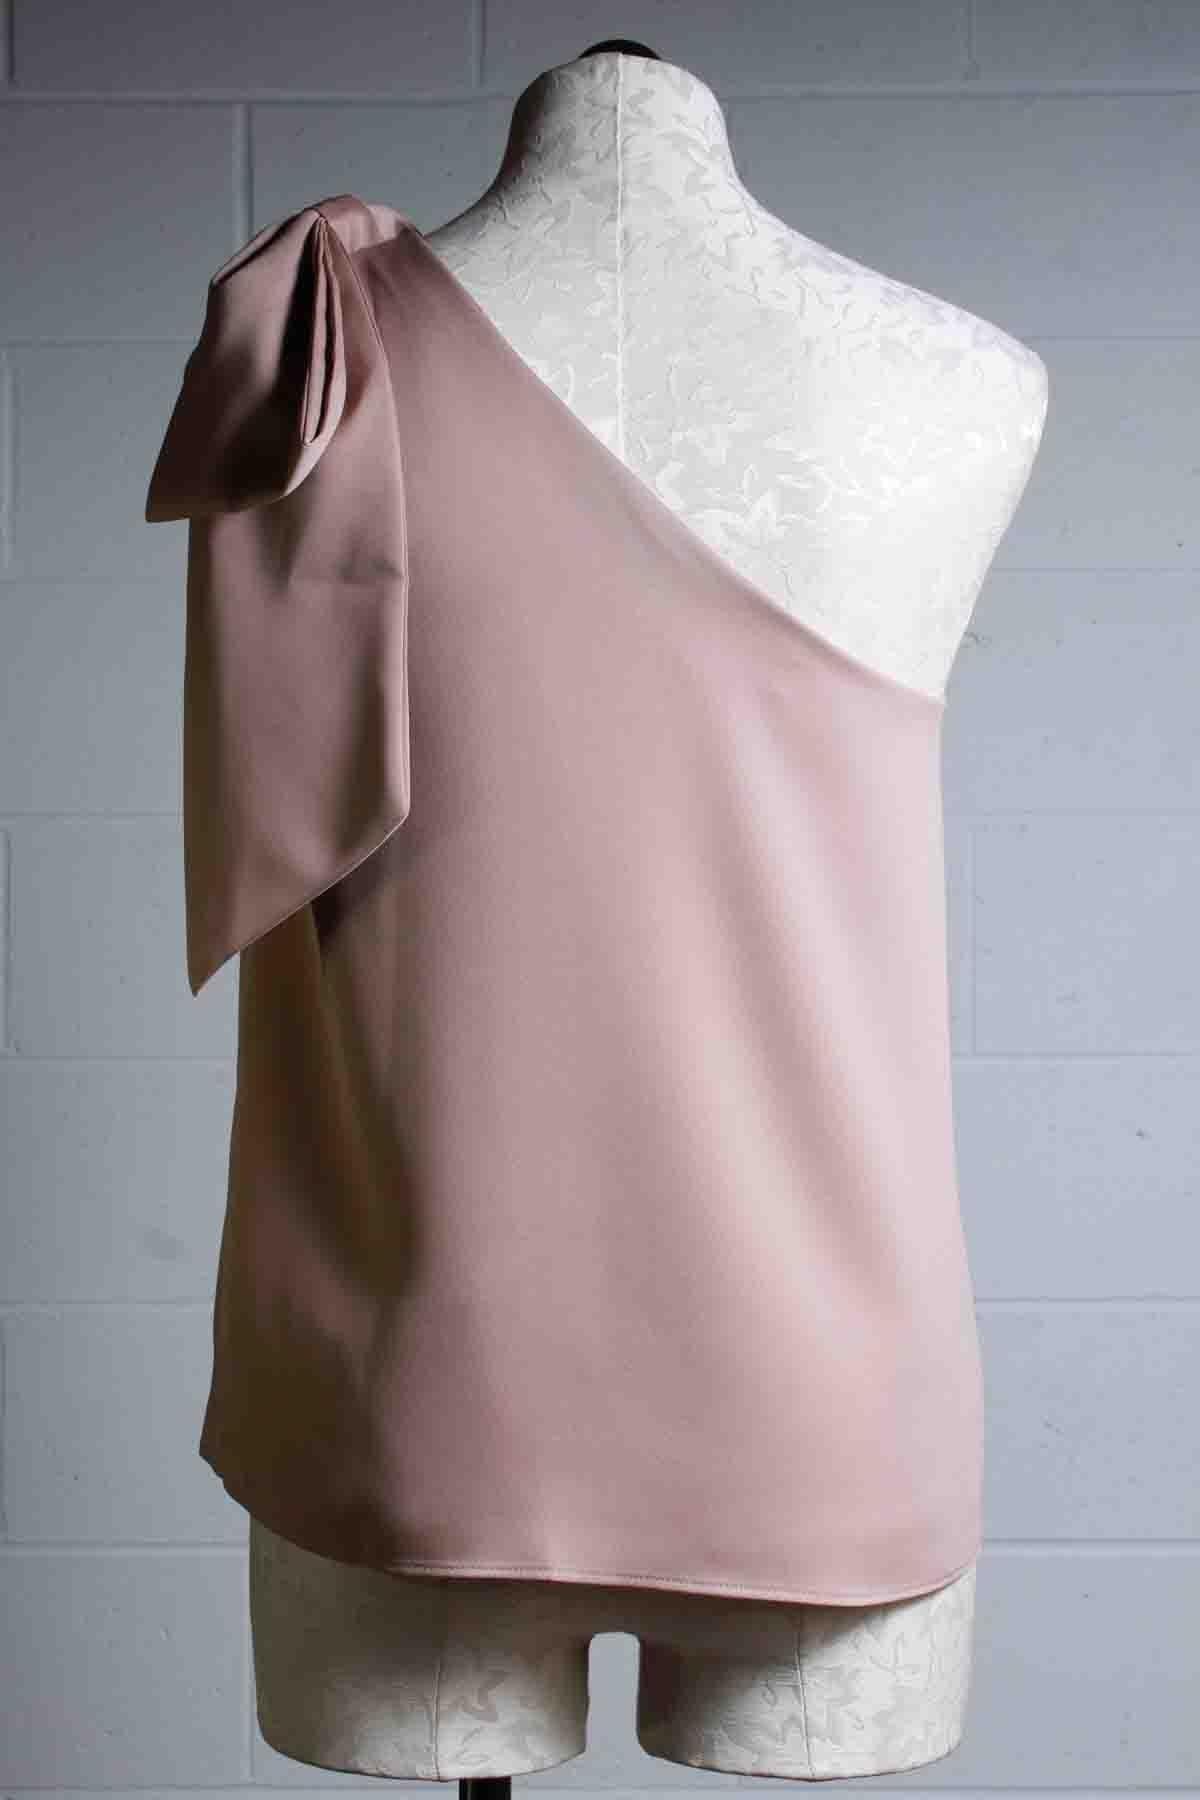 back view of one shoulder Khaki colored Warm Top by Trina Turk with a gorgeous bow draped over the other shoulder